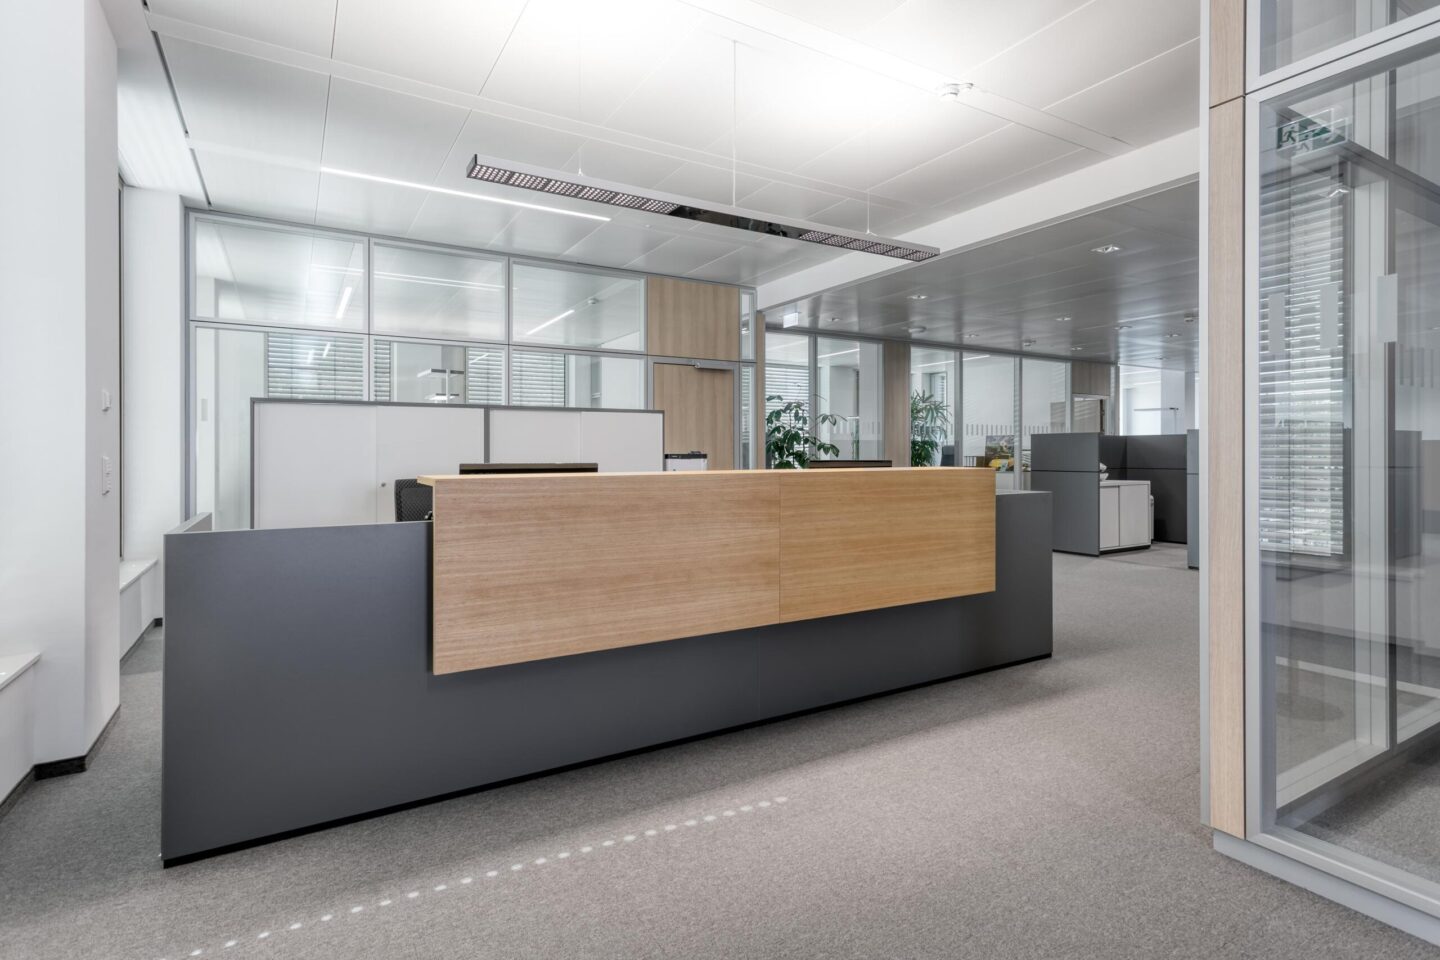 Kolb & Zerweck tax consultants │ comfortable office furnishings │ modern working environments